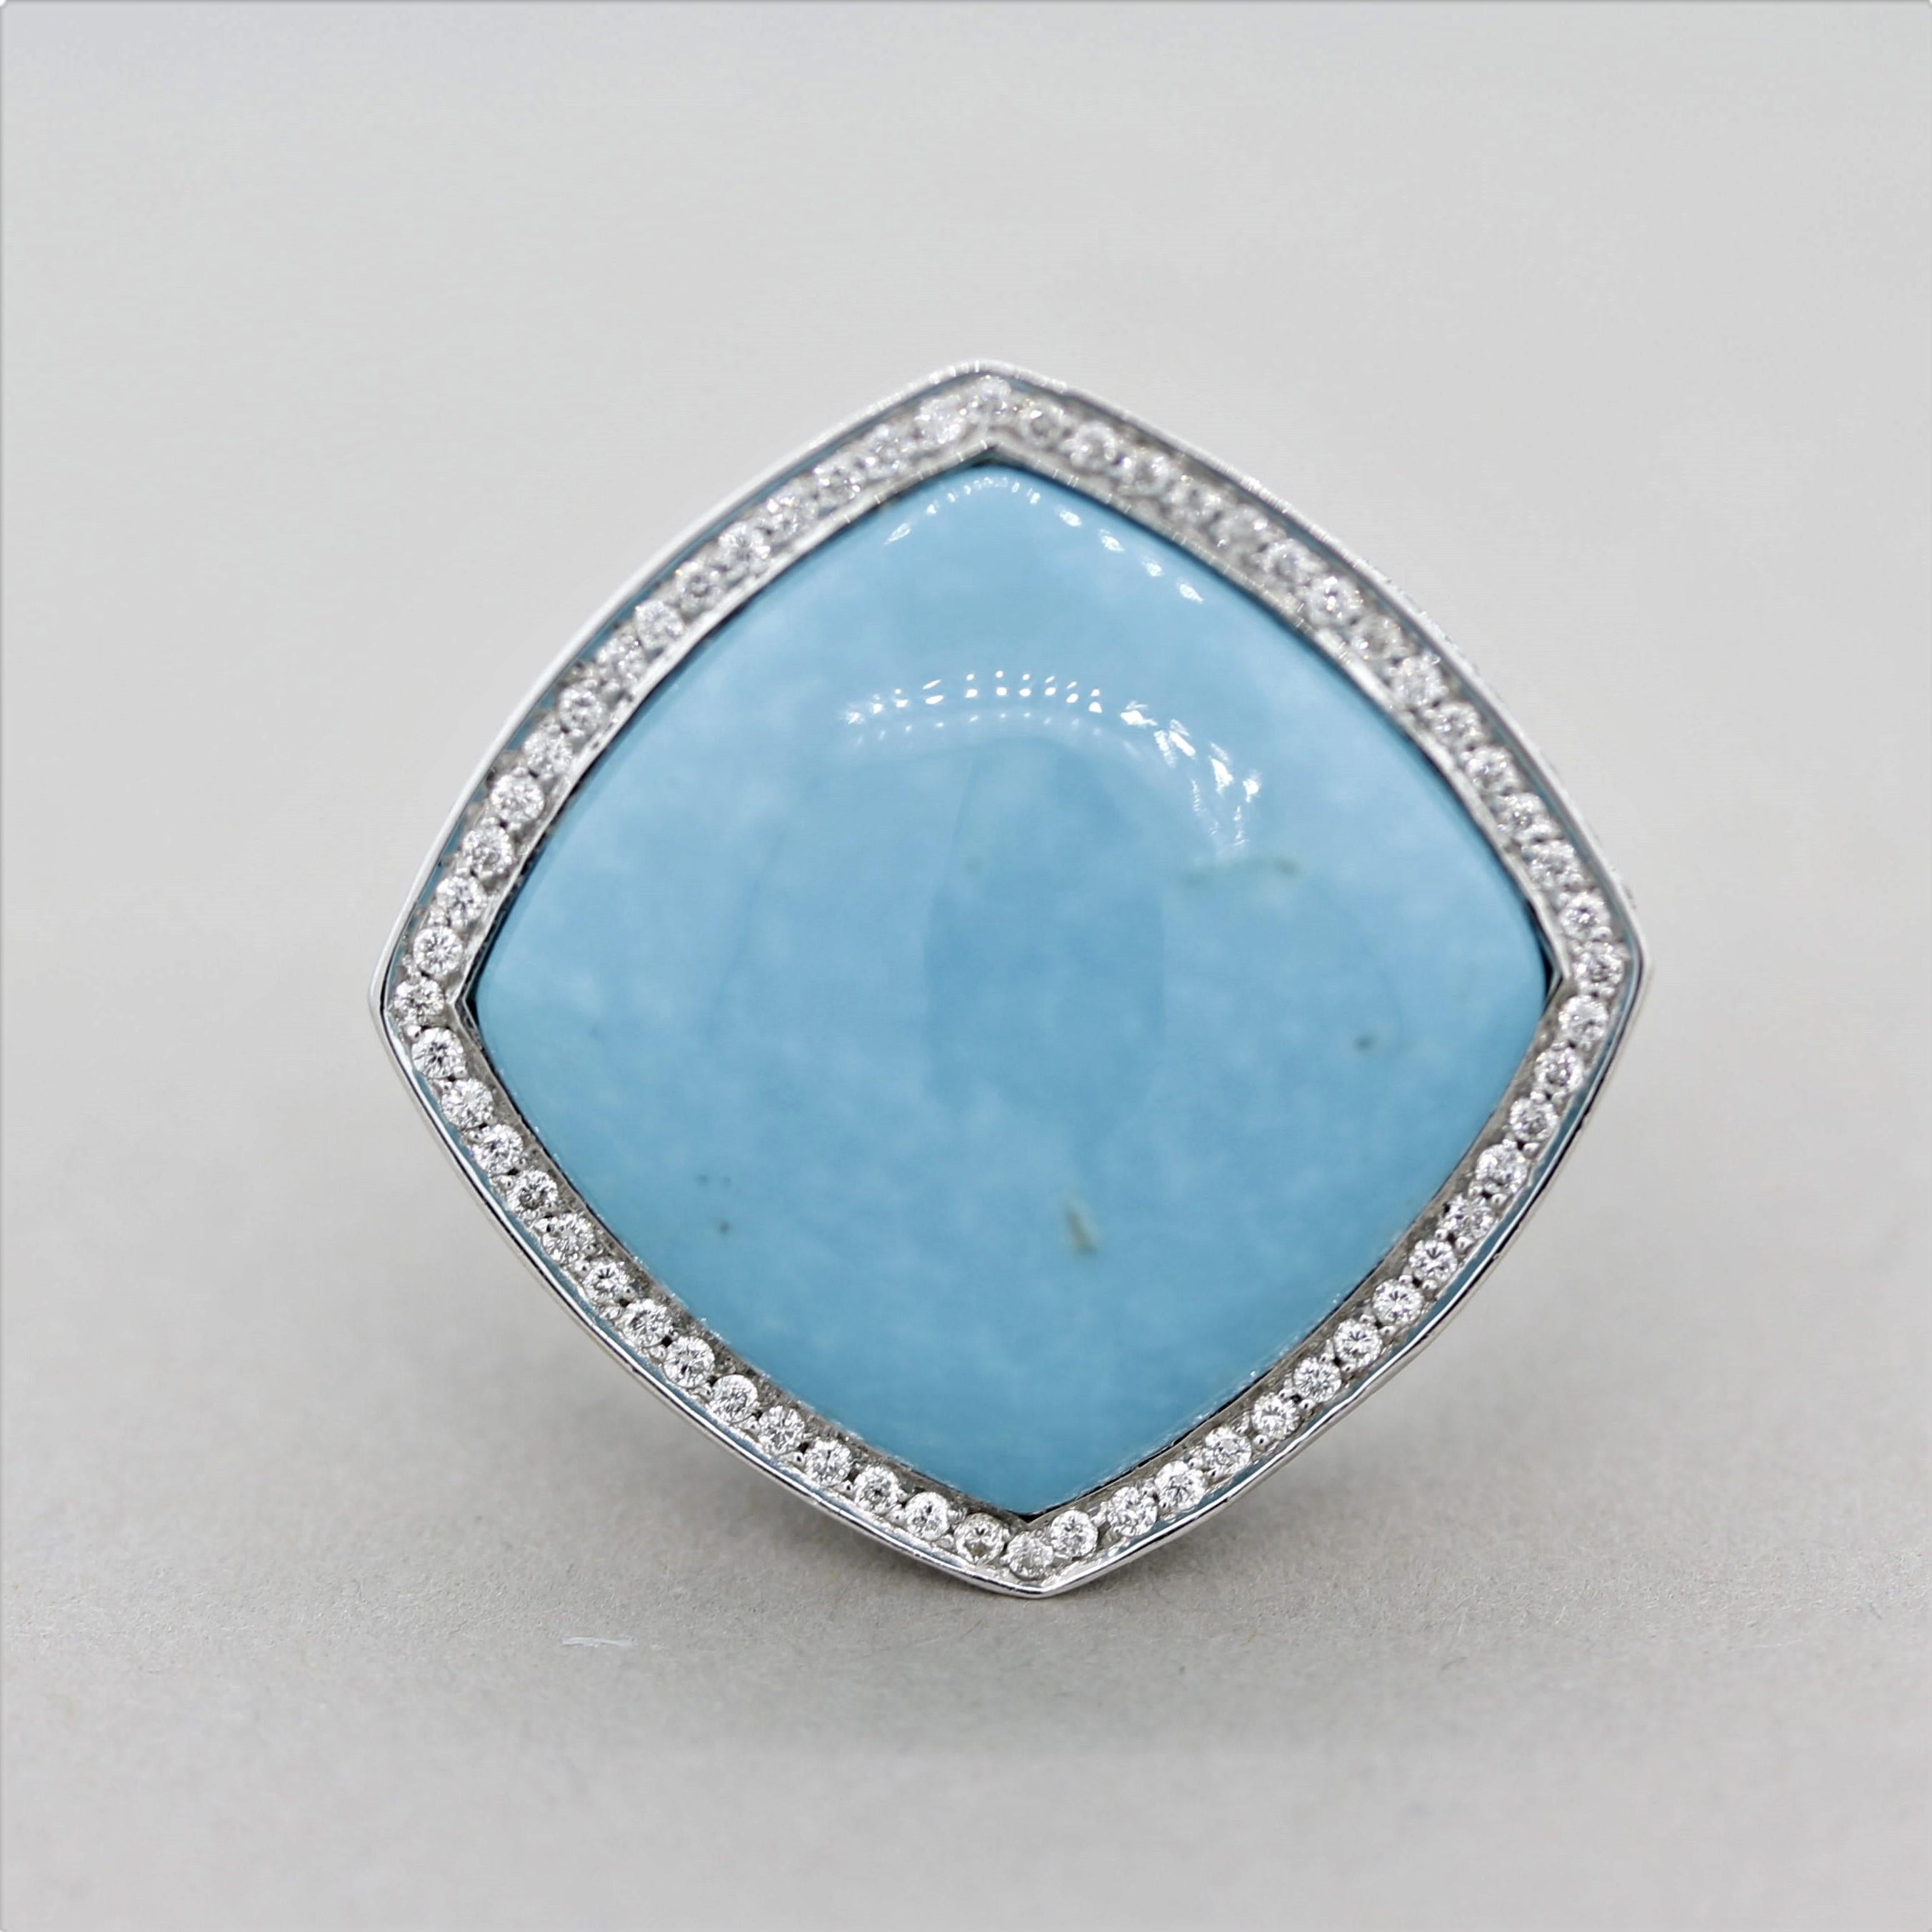 An exceptional ring made in France featuring a large piece of sky-blue turquoise in a kite shape. It is accented by 3.19 carats of fine round brilliant-cut diamonds which accented the turquoise with brightness and sparkle. Made in 18k white gold